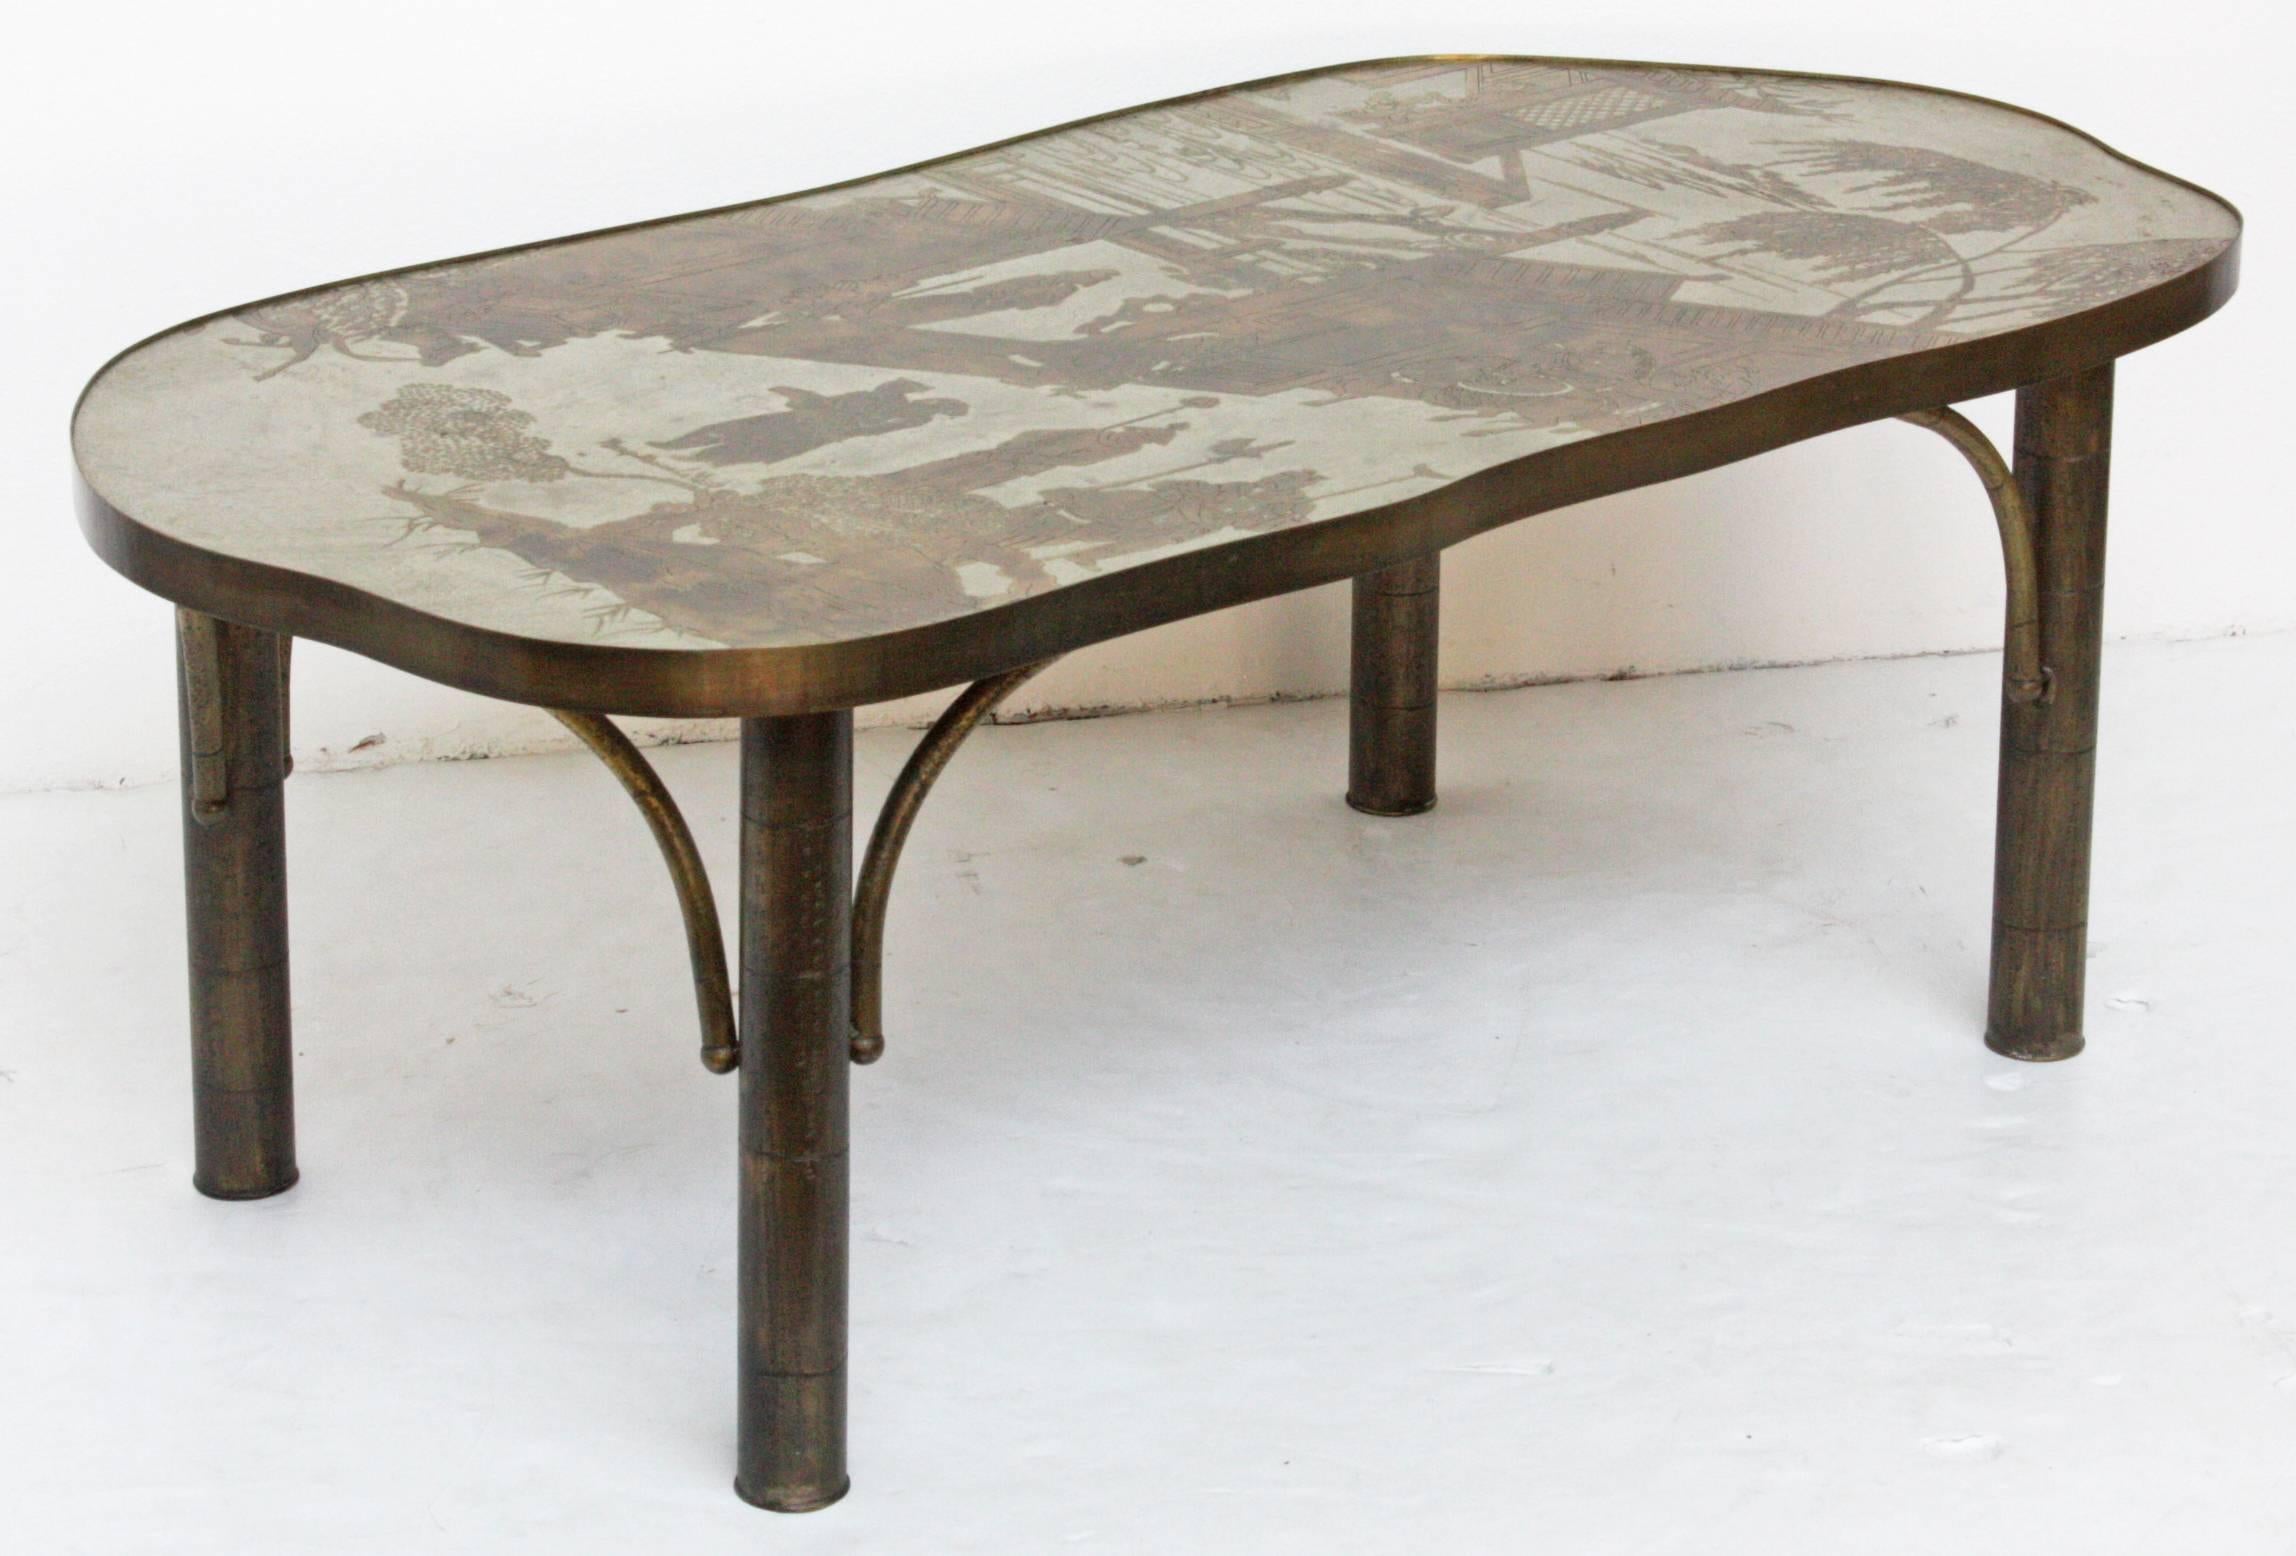 A La Verne acid etched bronze / mixed metals coffee table with chinoiserie decoration / scene, faux bamboo metal legs with curved brackets, signed on top.